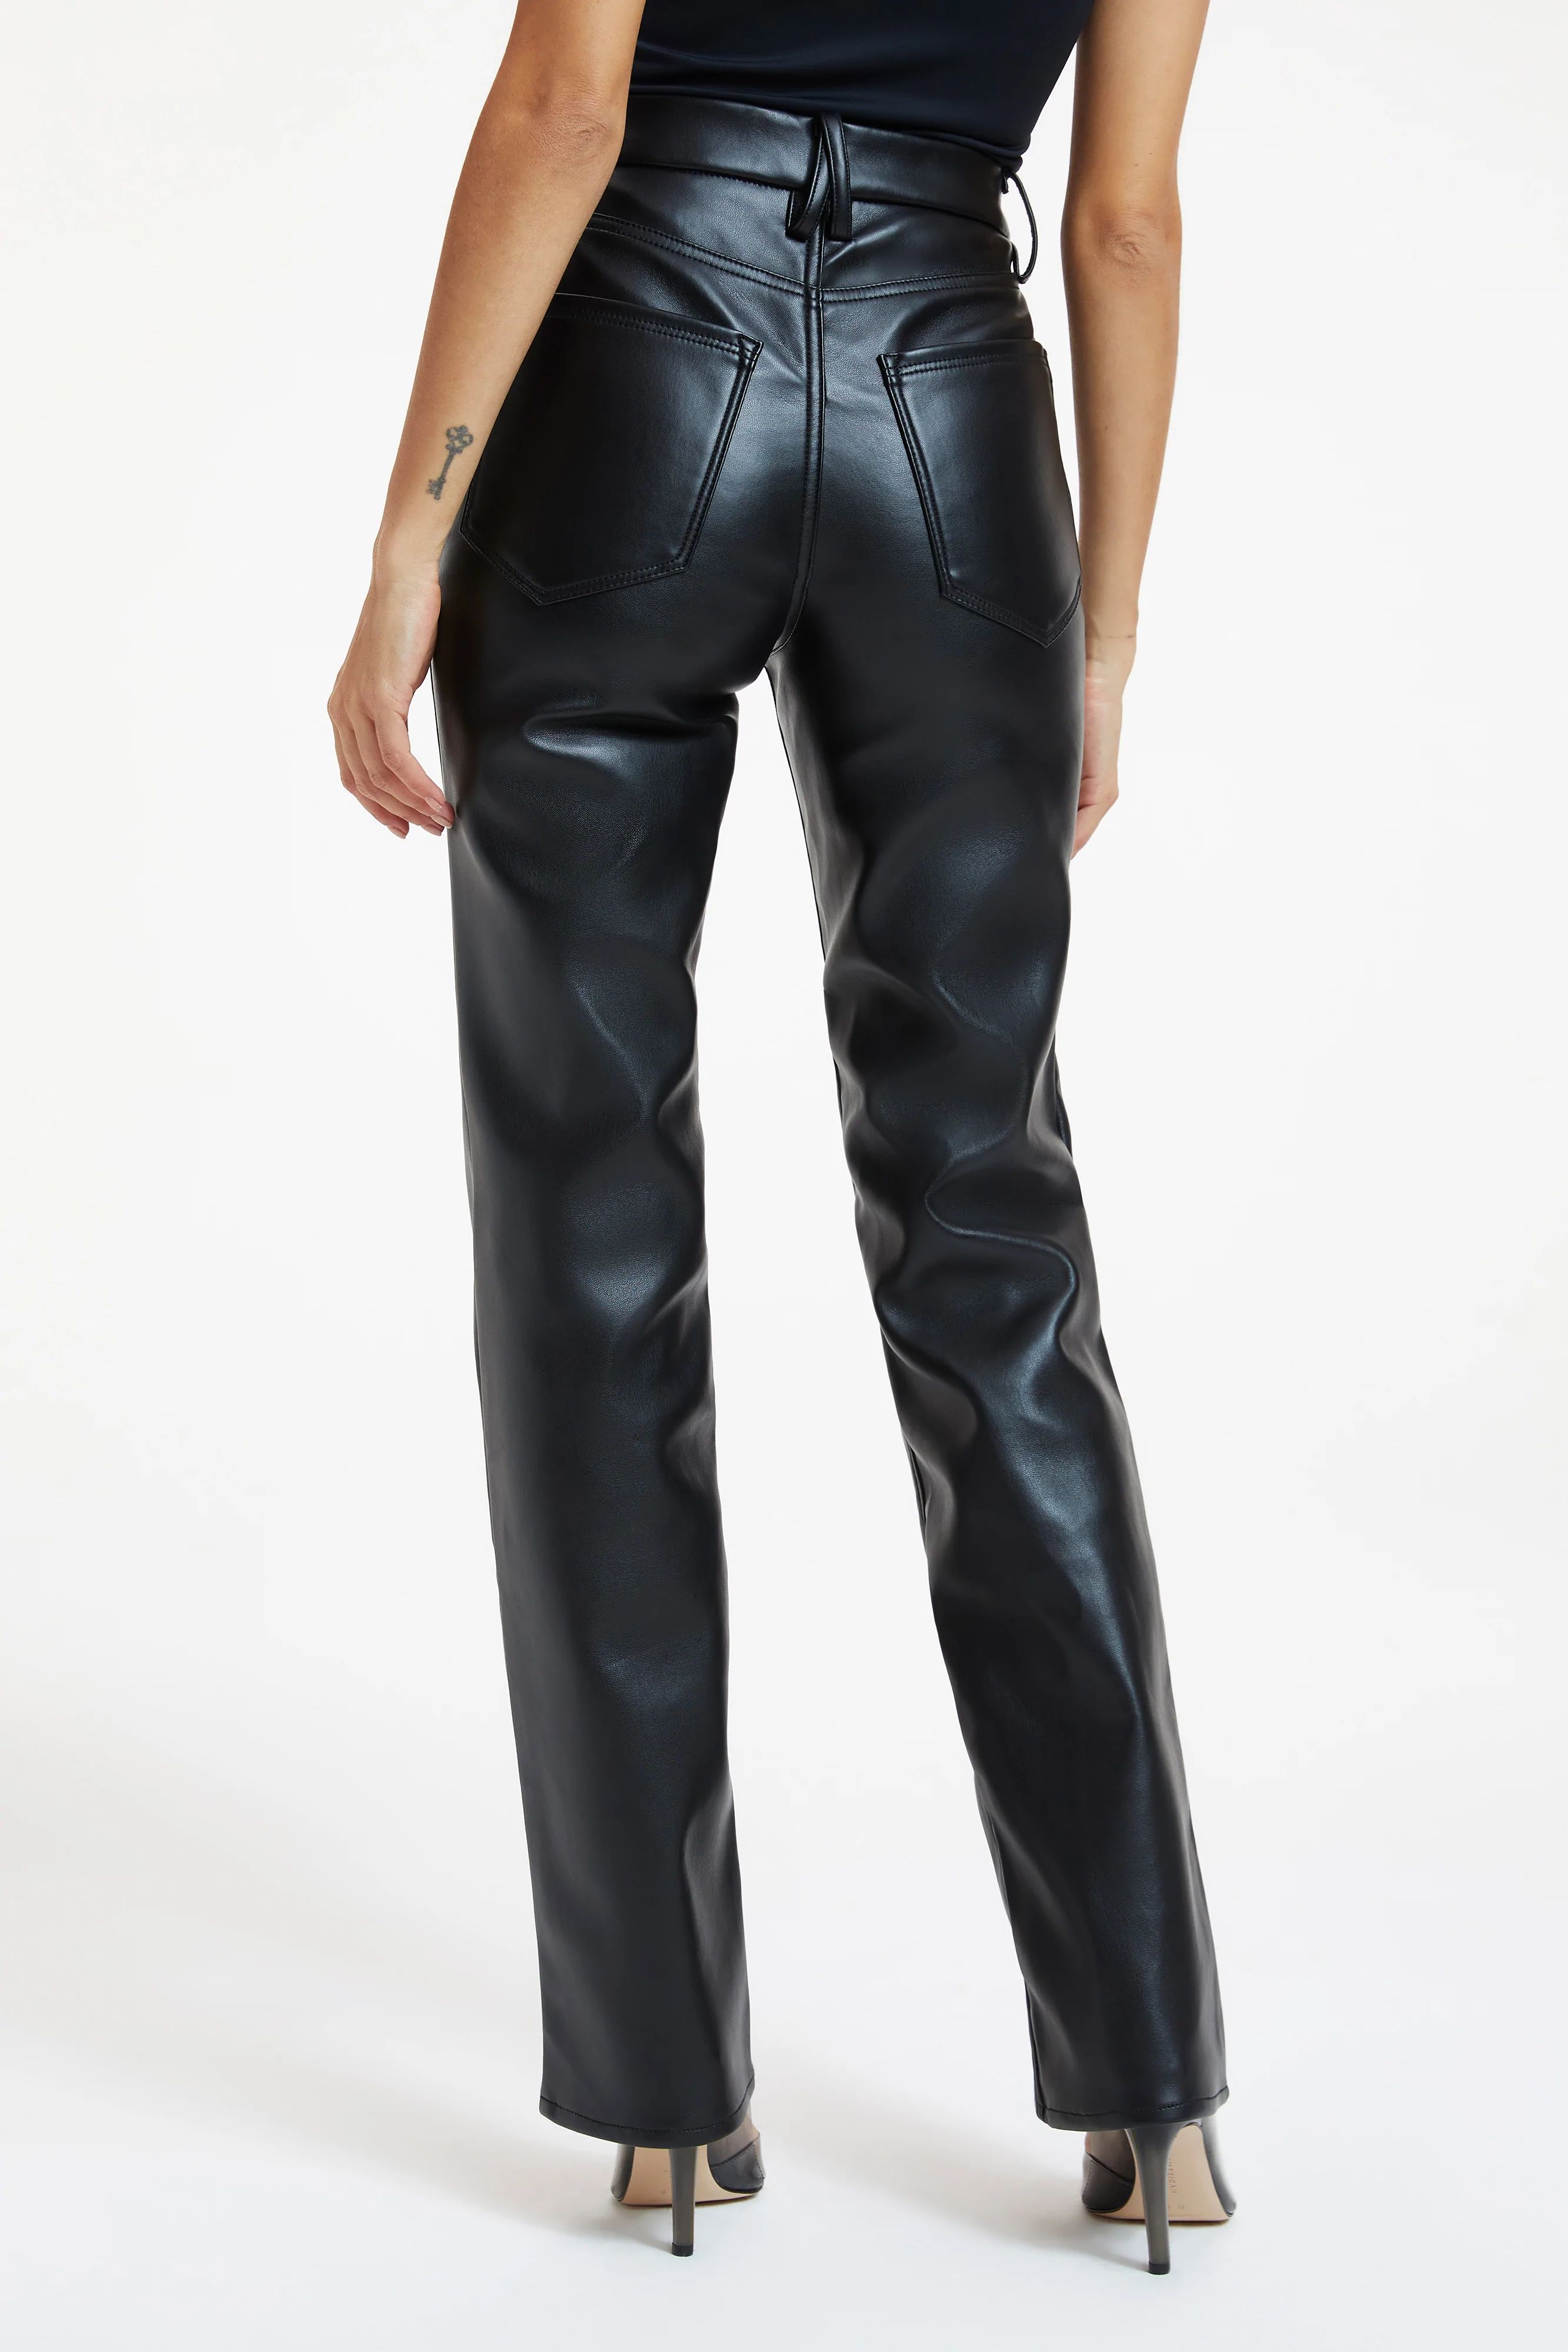 GOOD ICON FAUX LEATHER PANTS | BLACK001 | Good American